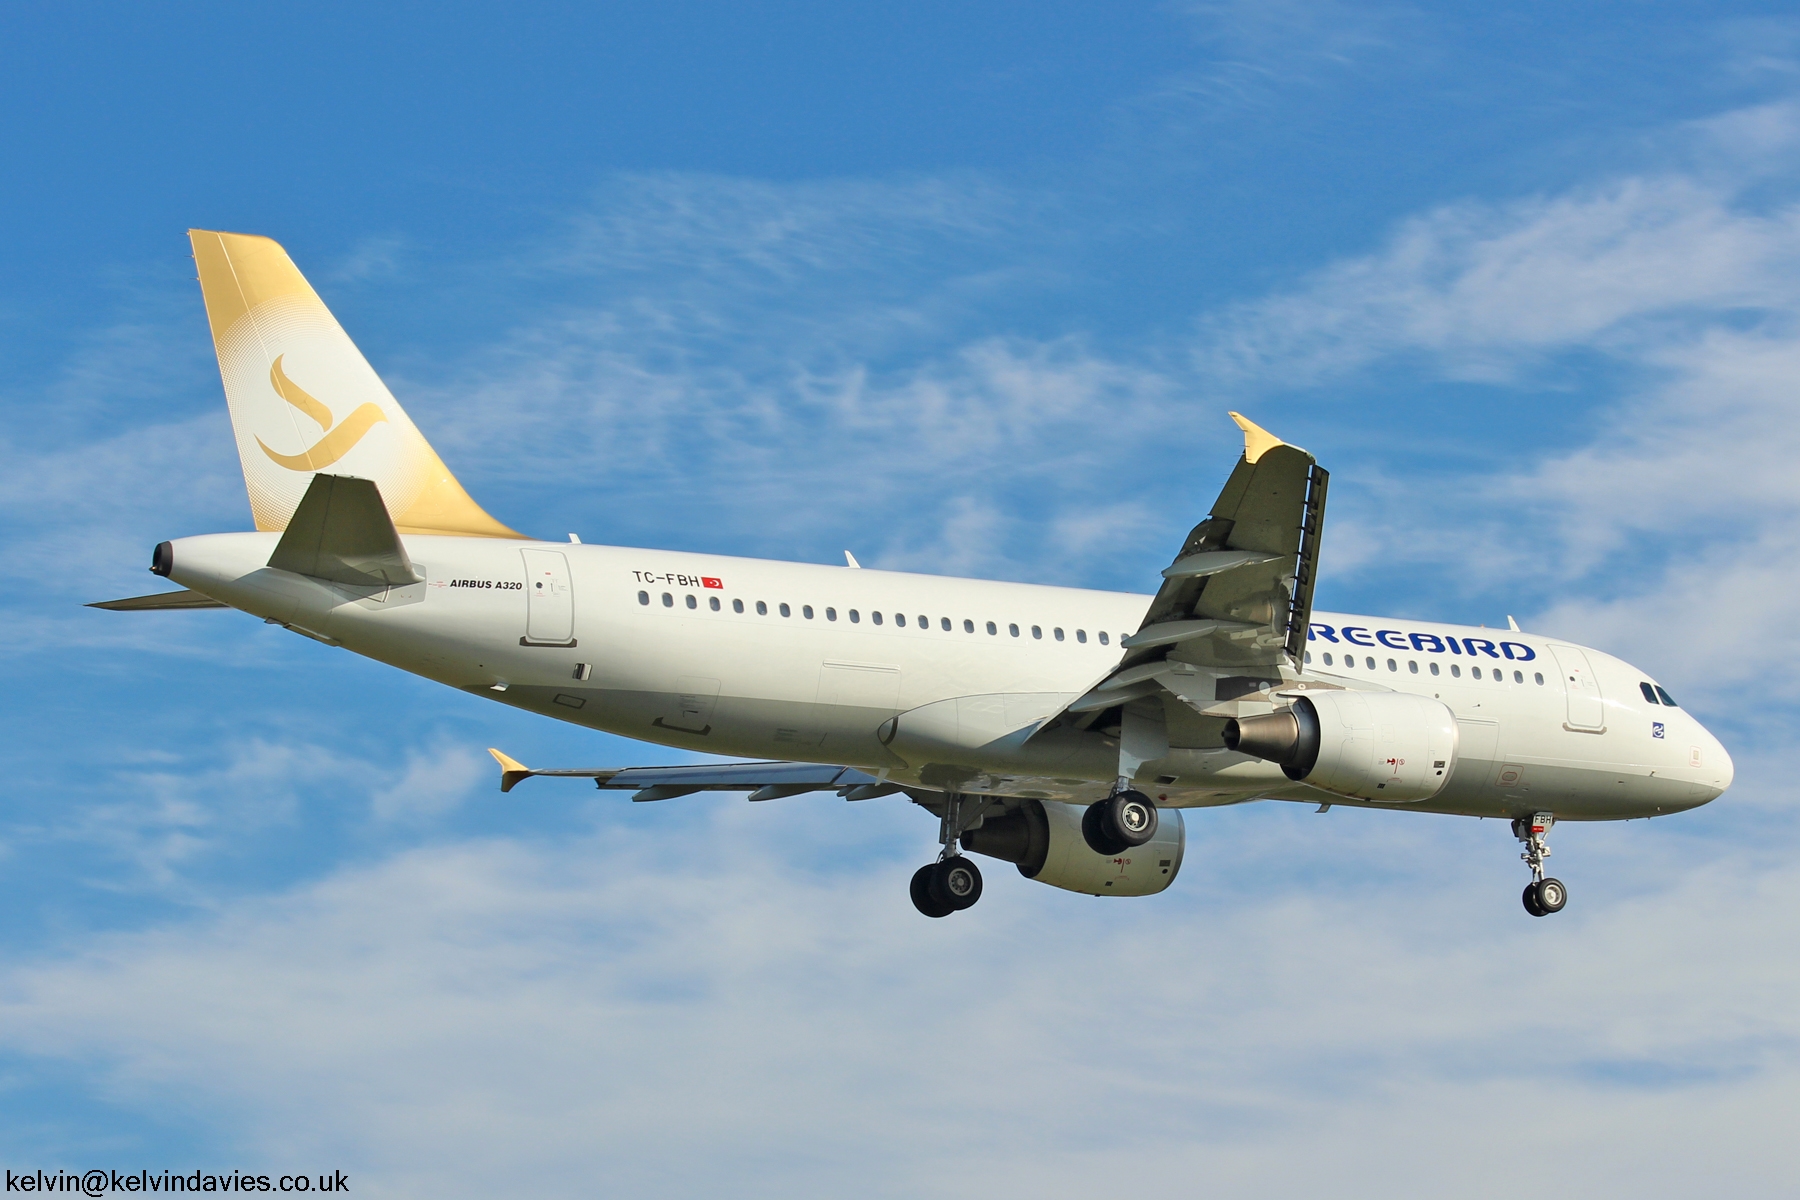 Freebird Airlines A320 TC-FBH